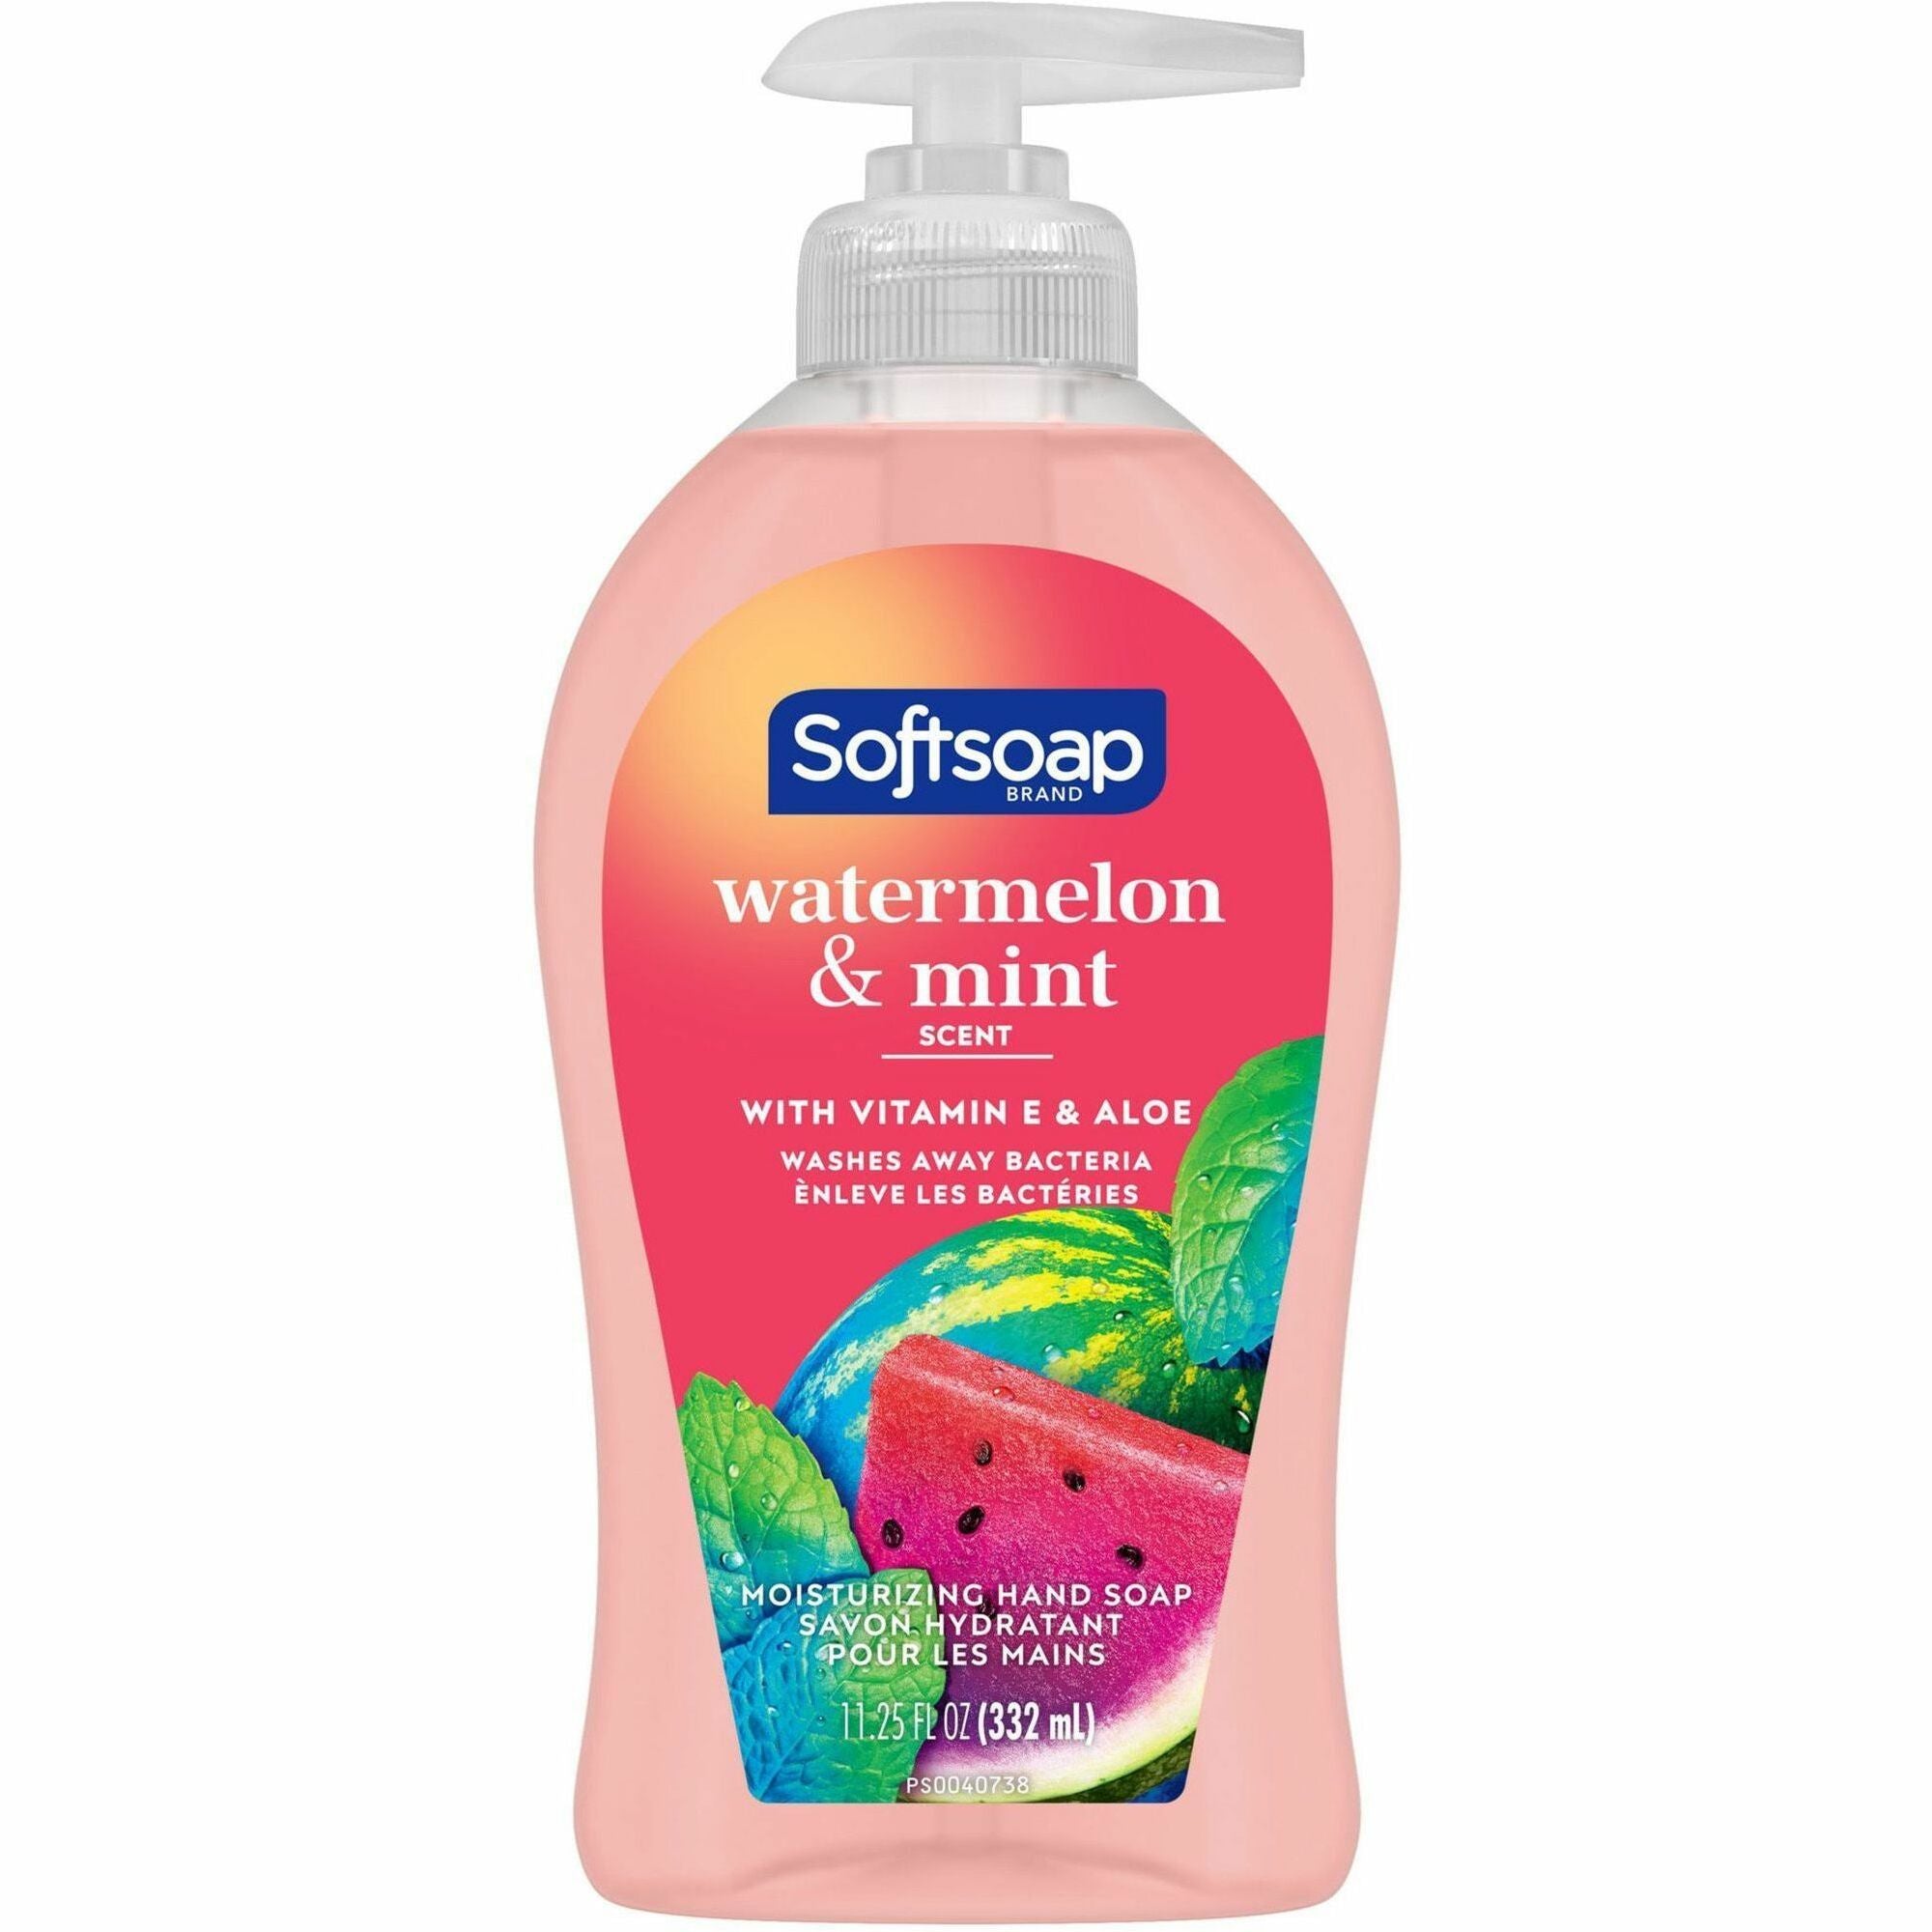 softsoap-watermelon-hand-soap-watermelon-&-mint-scentfor-113-fl-oz-3327-ml-pump-bottle-dispenser-bacteria-remover-dirt-remover-hand-skin-moisturizing-pink-refillable-recyclable-paraben-free-phthalate-free-biodegradable-1-e_cpcus07064a - 1